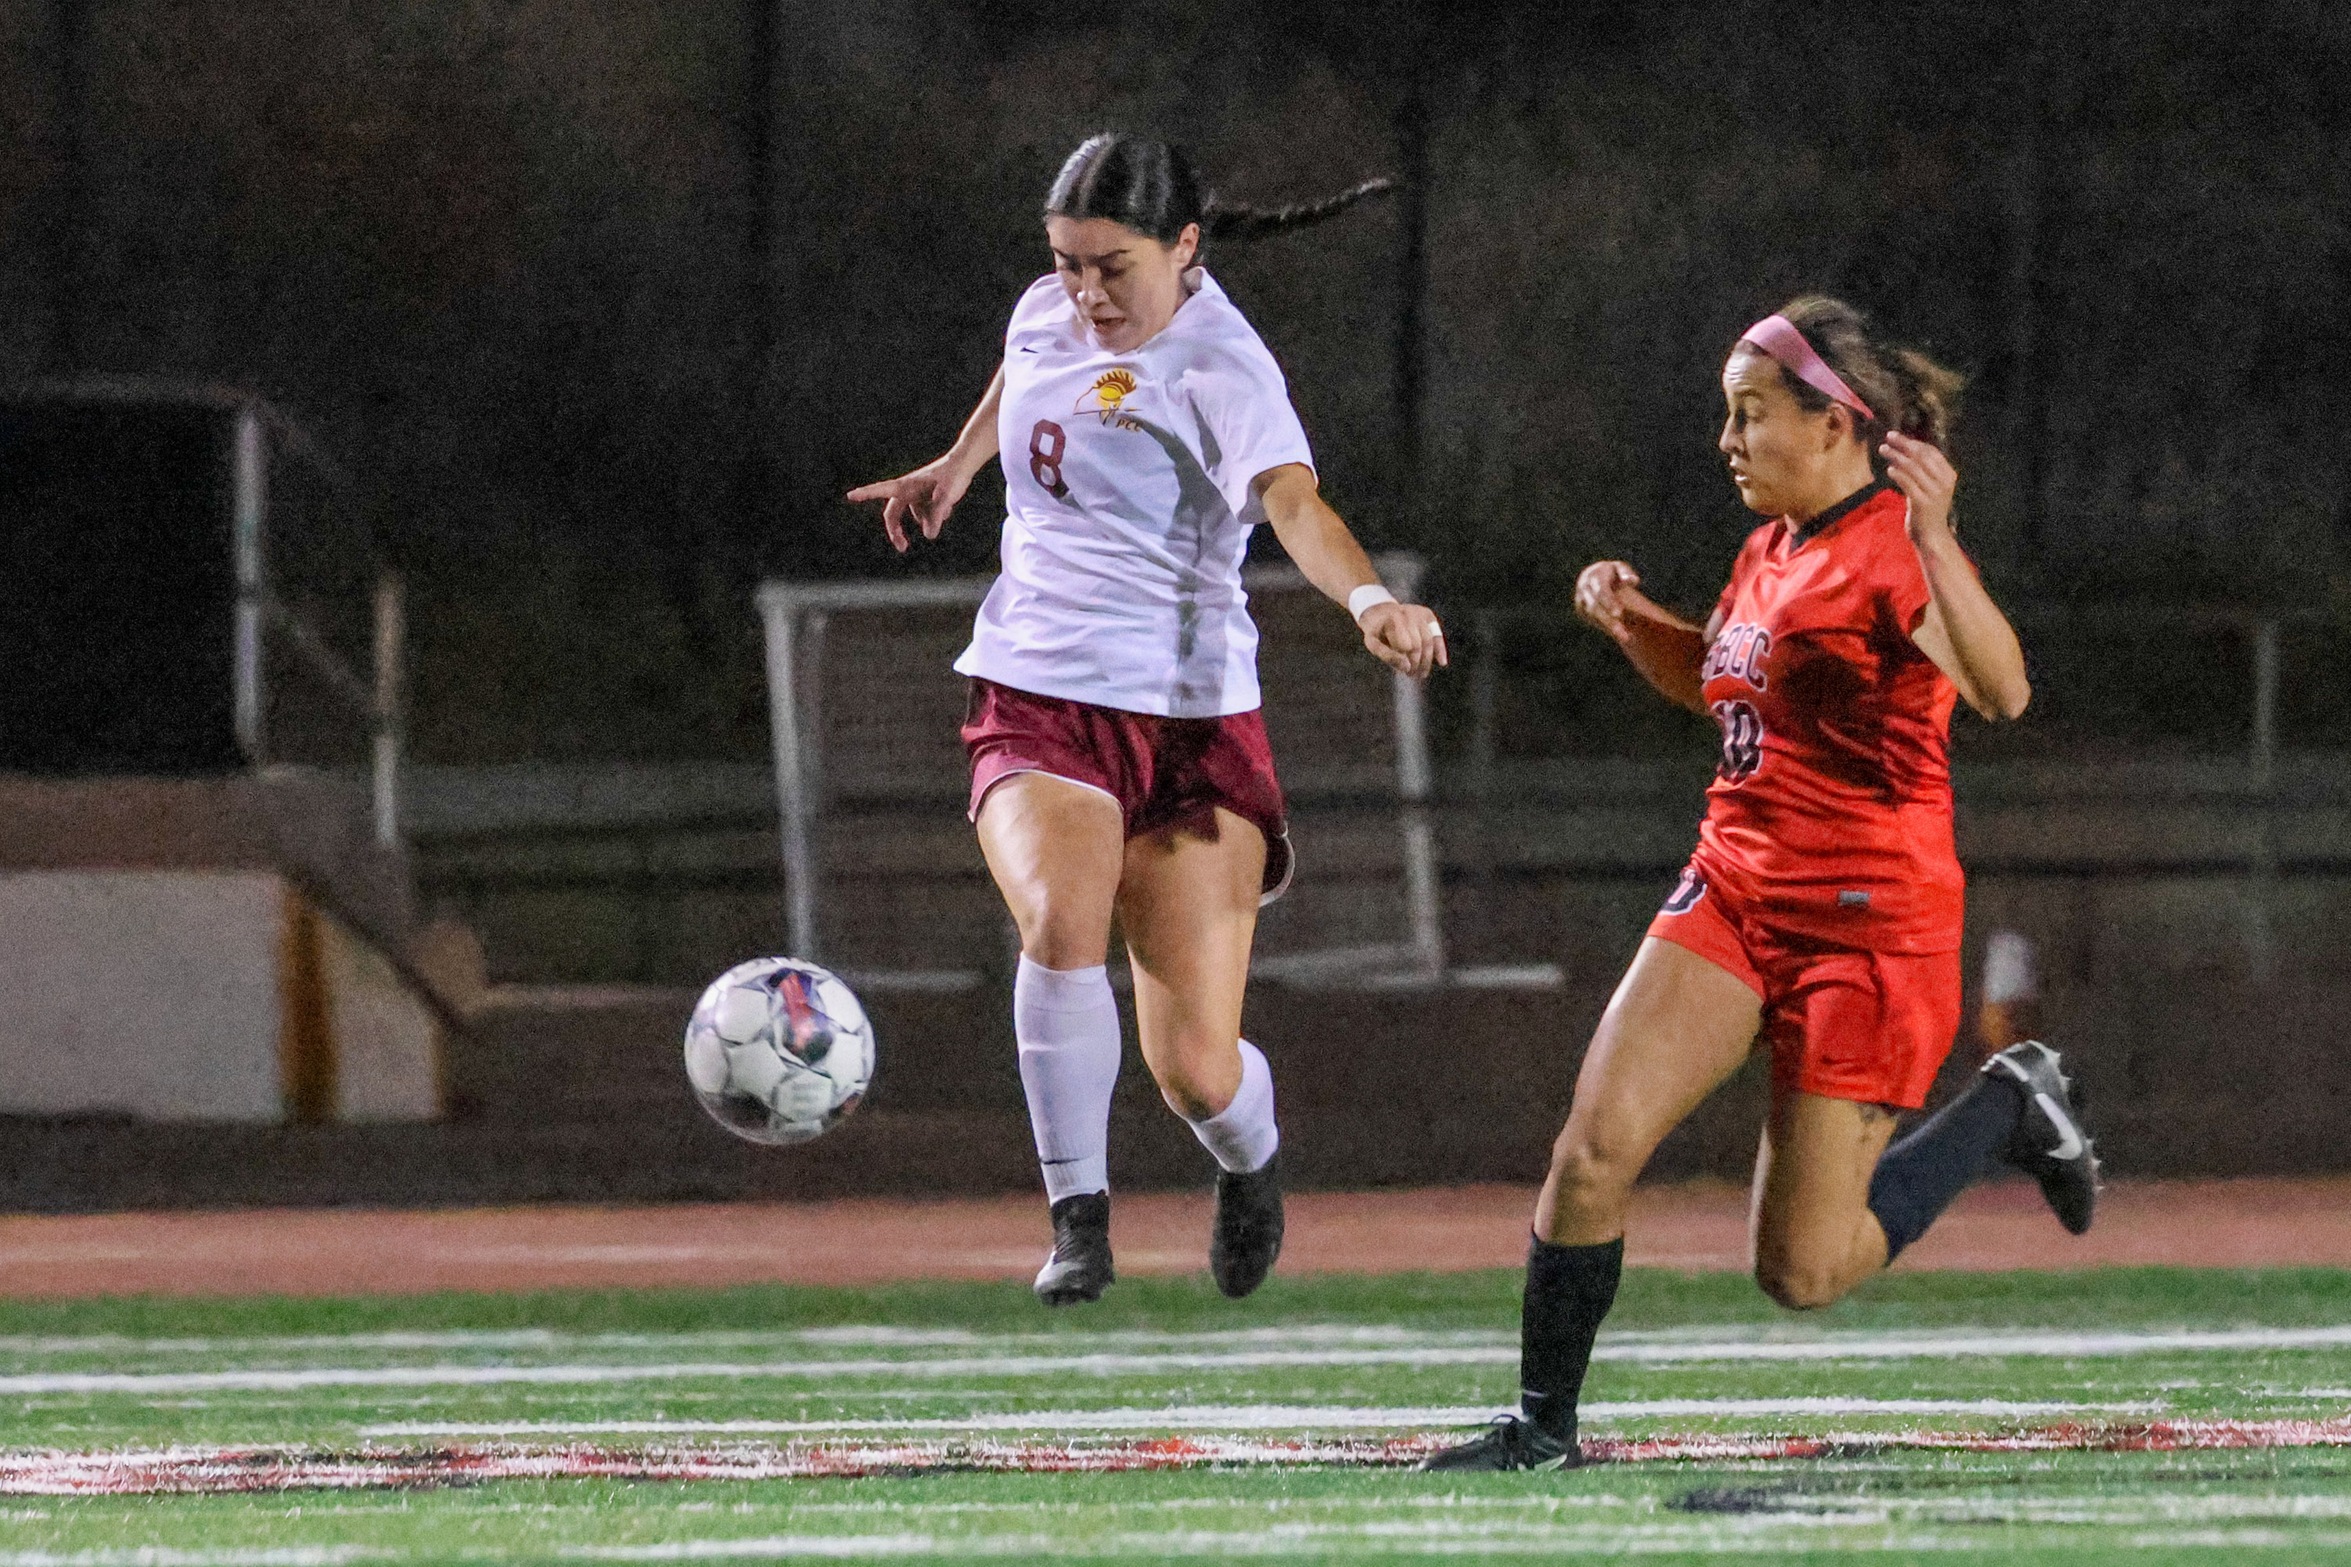 Destiny Delgado in action during PCC's regional playoff game at SBCC (photo by Richard Quinton).